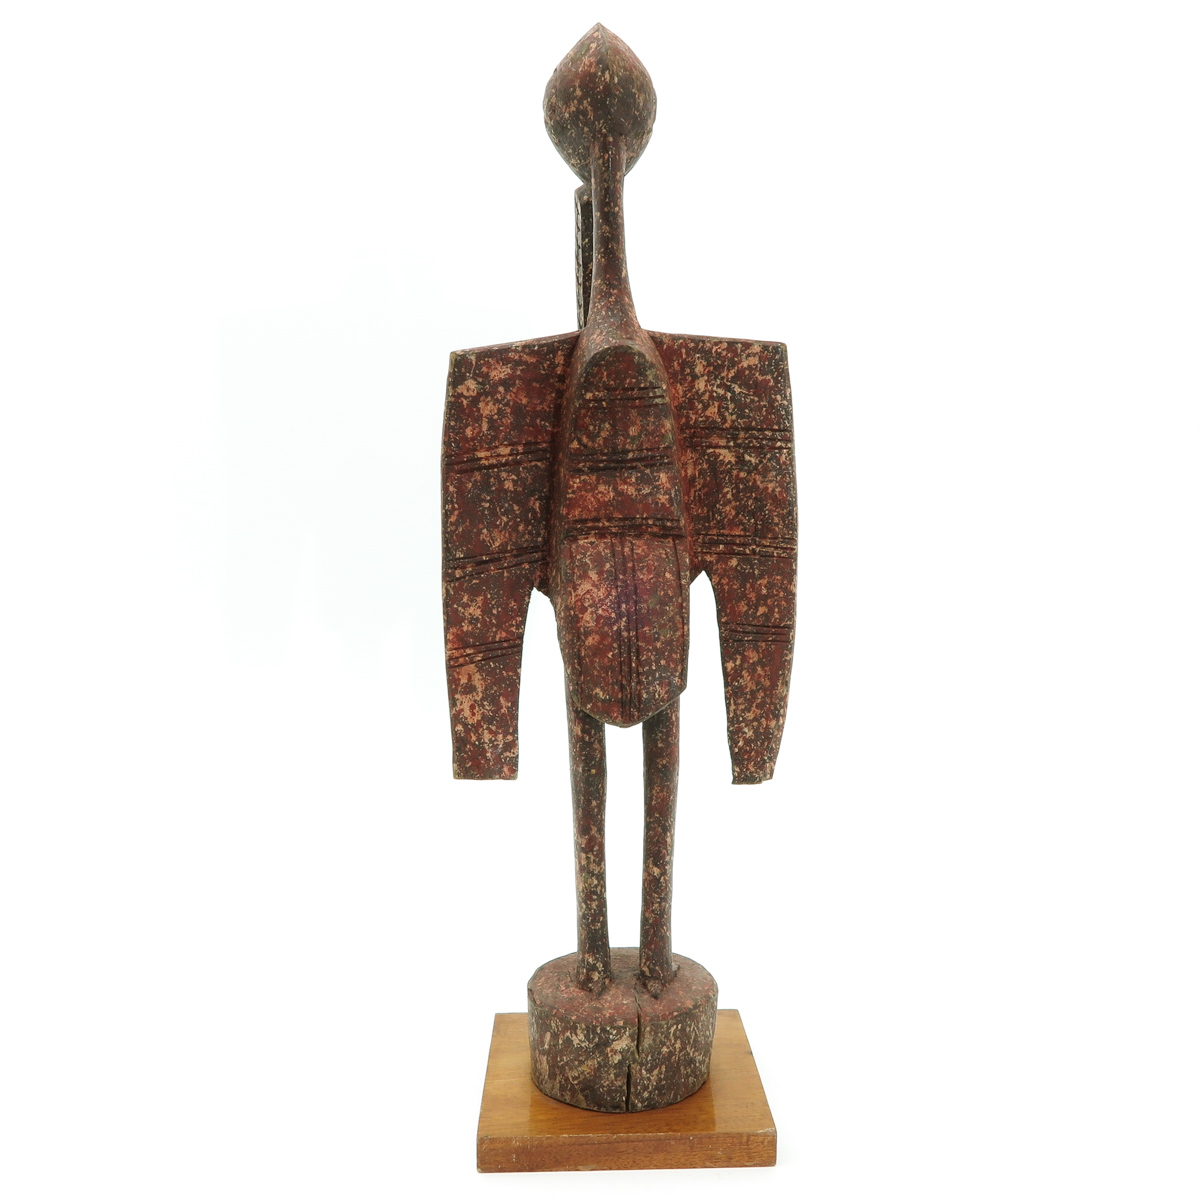 A Carved Wood Sculpture - Image 4 of 5